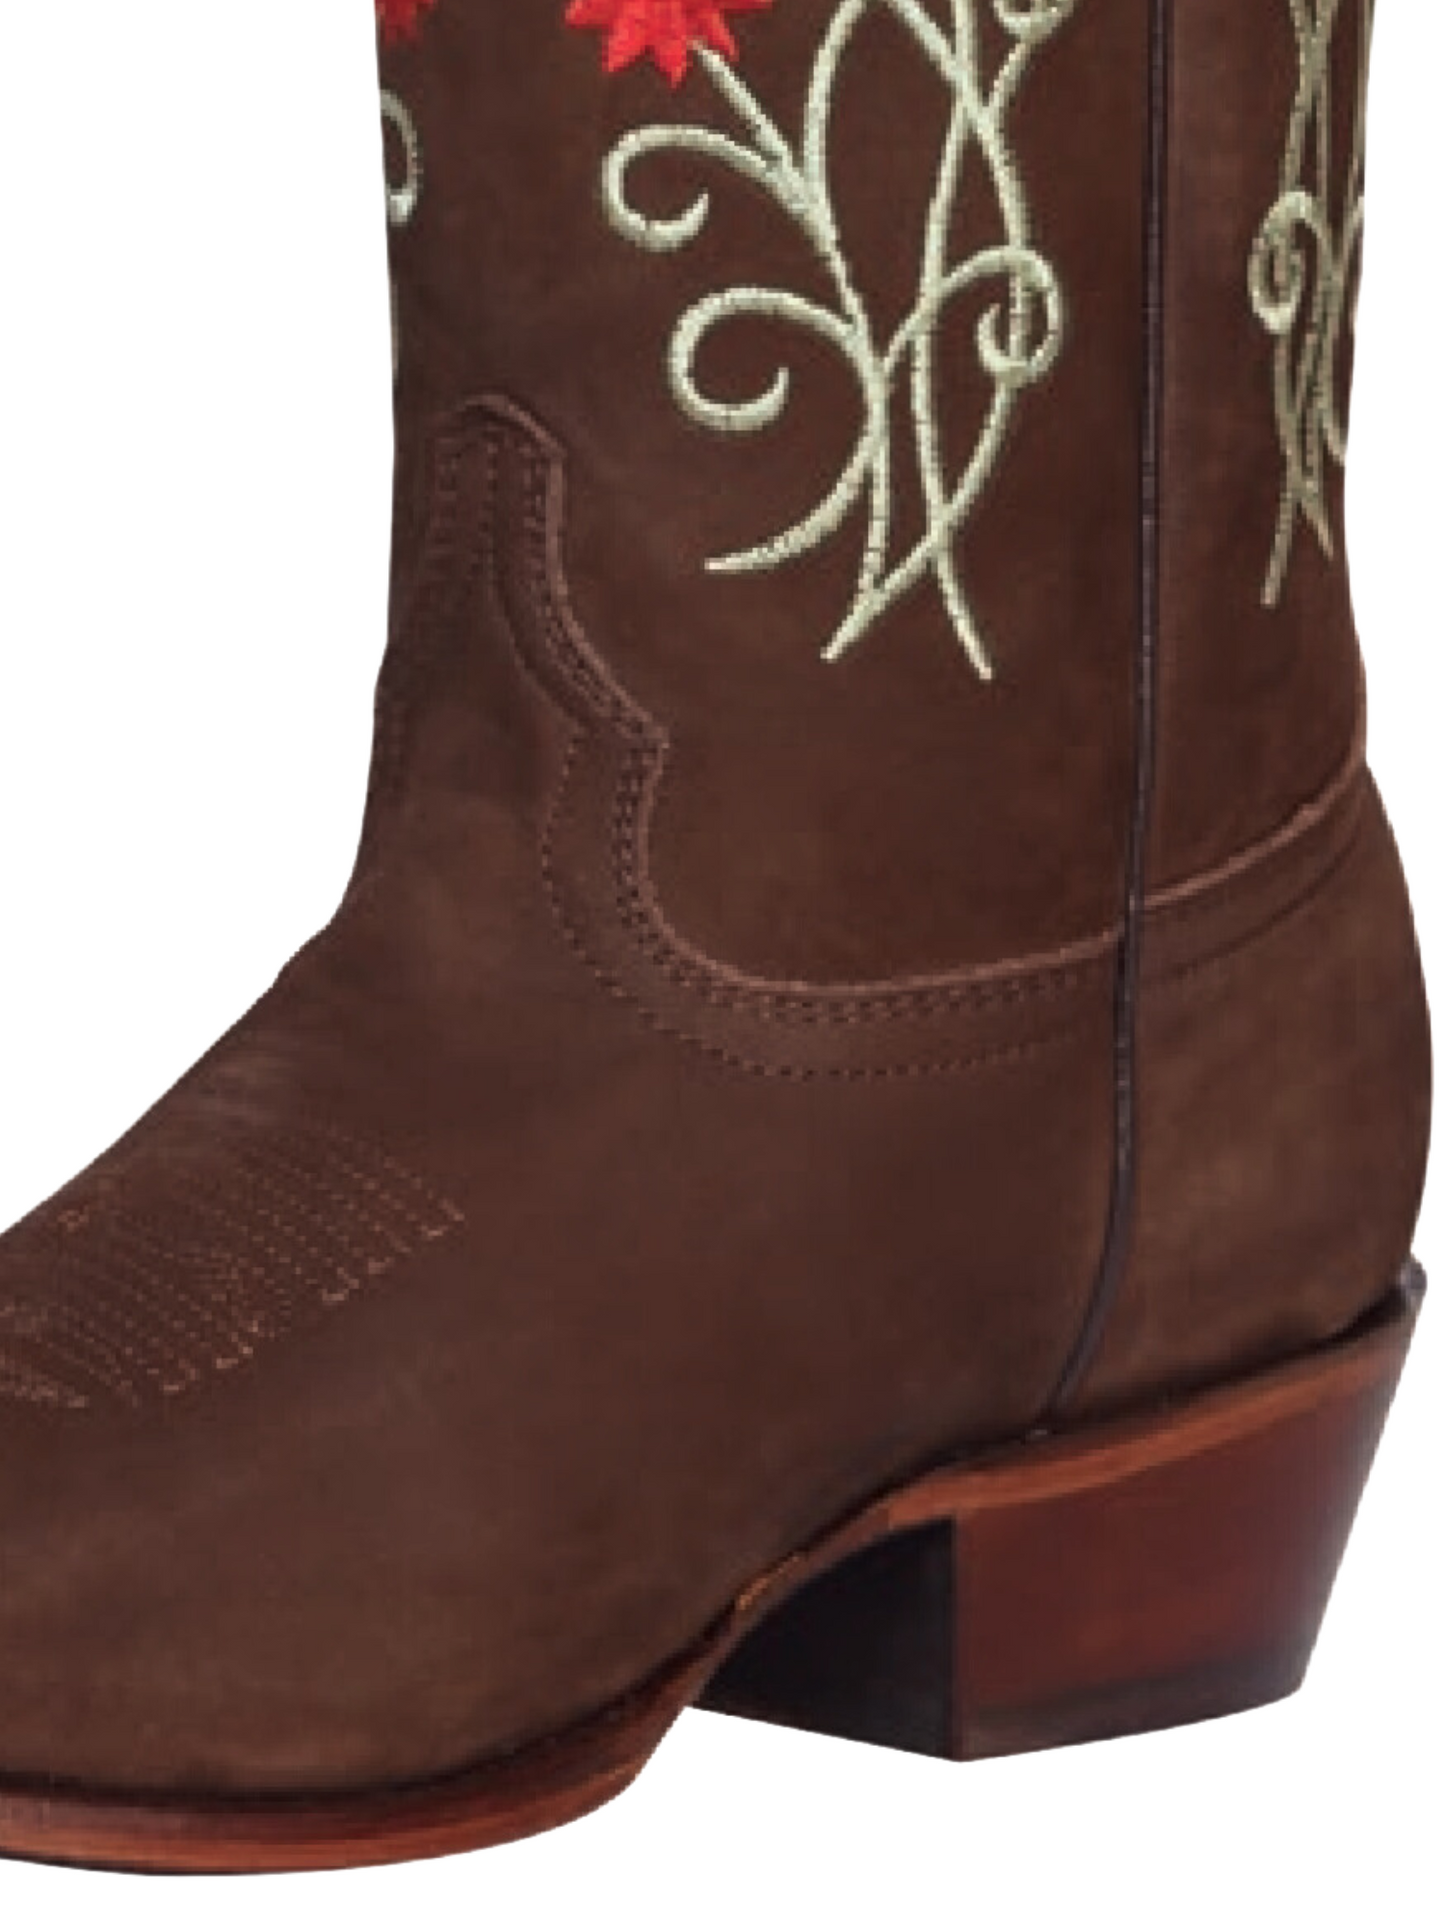 Retro Cowboy Boots with Nobuck Leather Flowers Embroidered Tube for Women 'El General' - ID: 41789